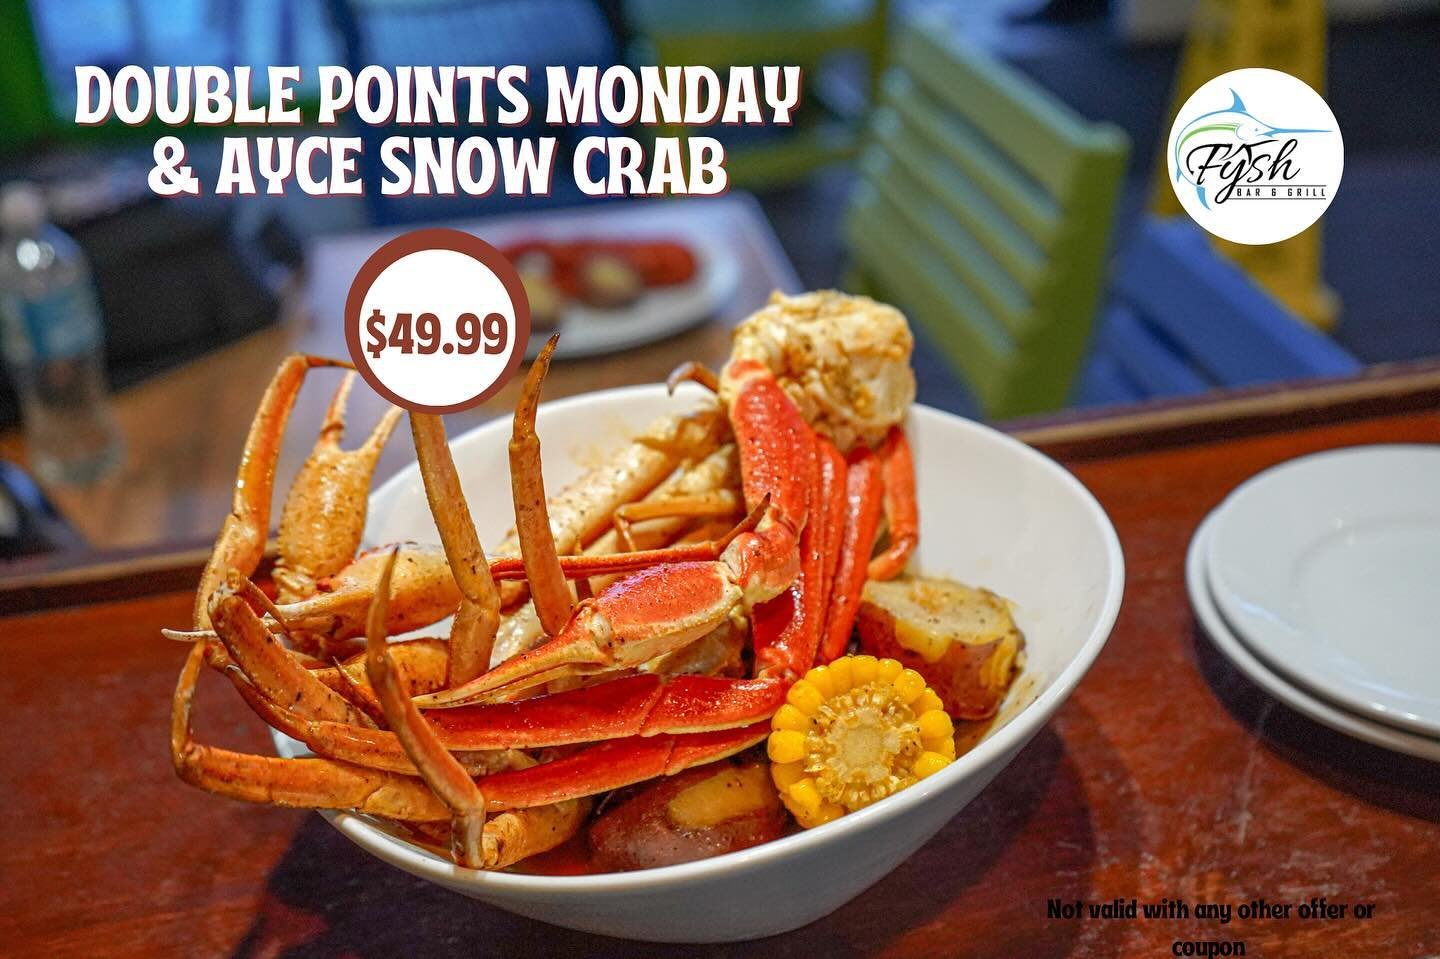 Enjoy our AYCE Snow Crab &amp; earn double your rewards points every Monday!